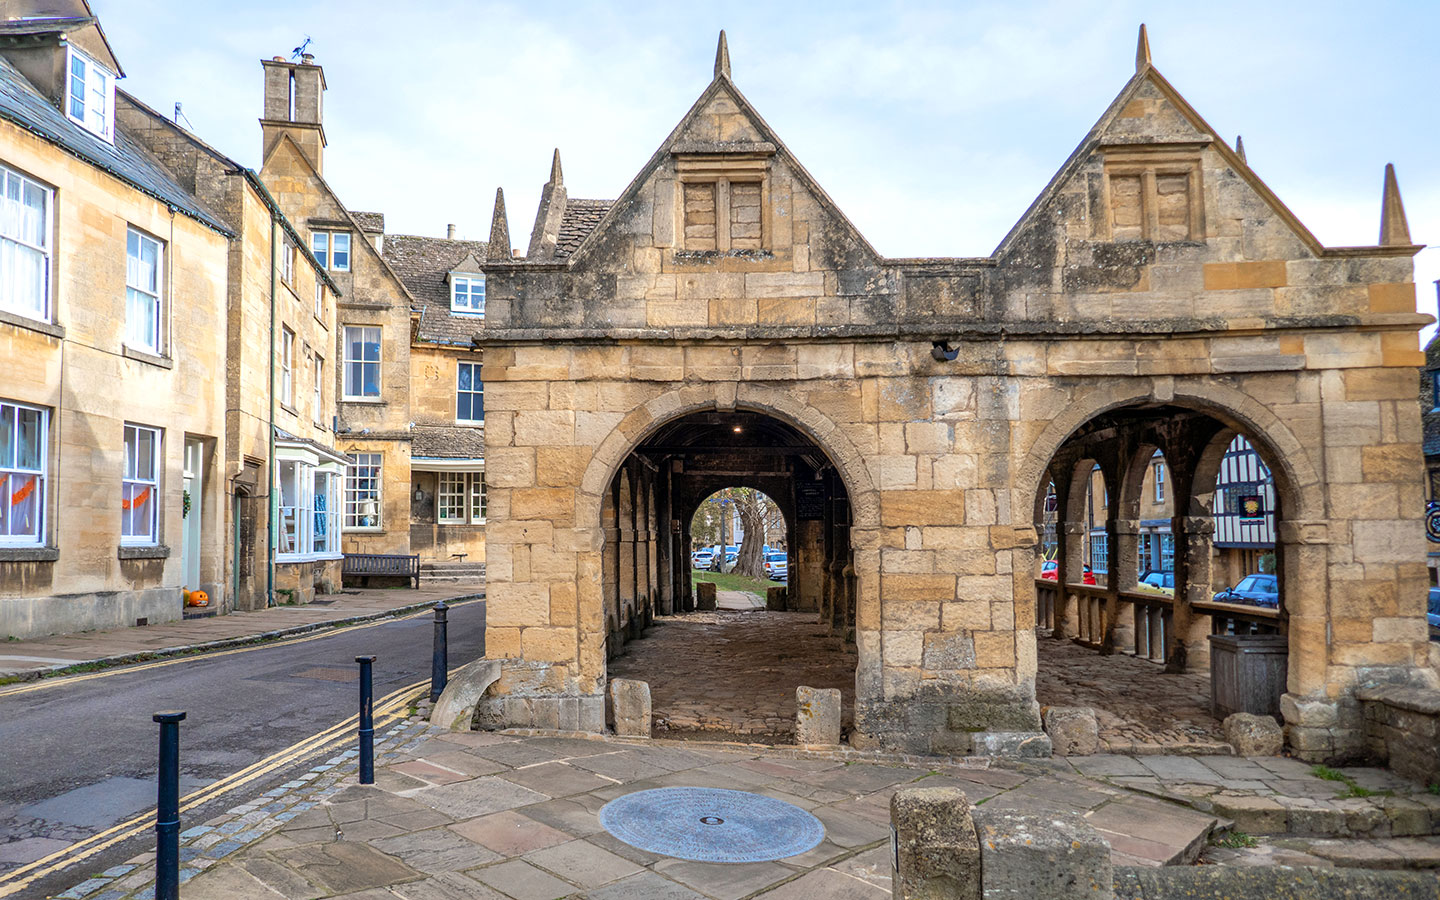 The Market House in Chipping Campden in the Cotswolds